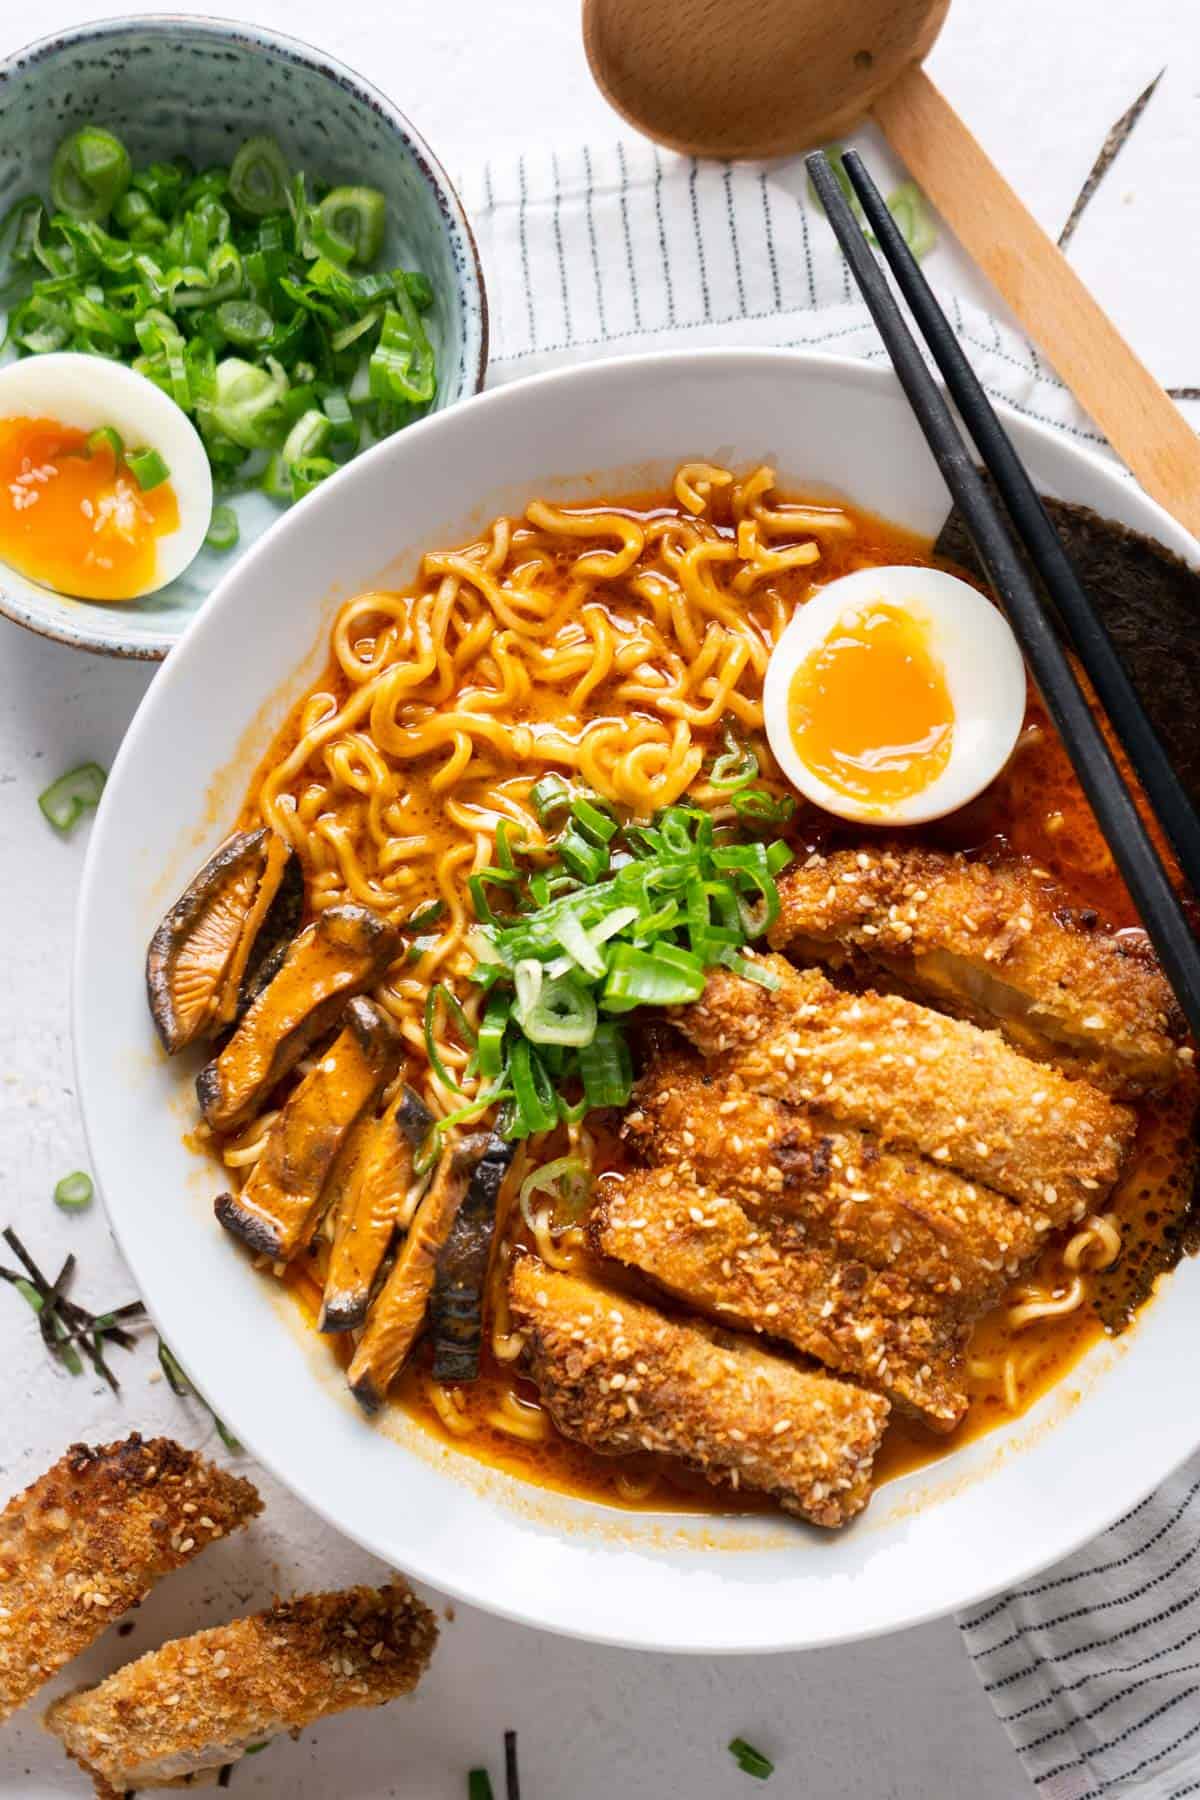 Spicy ramen with chicken katsu in a bowl view from top